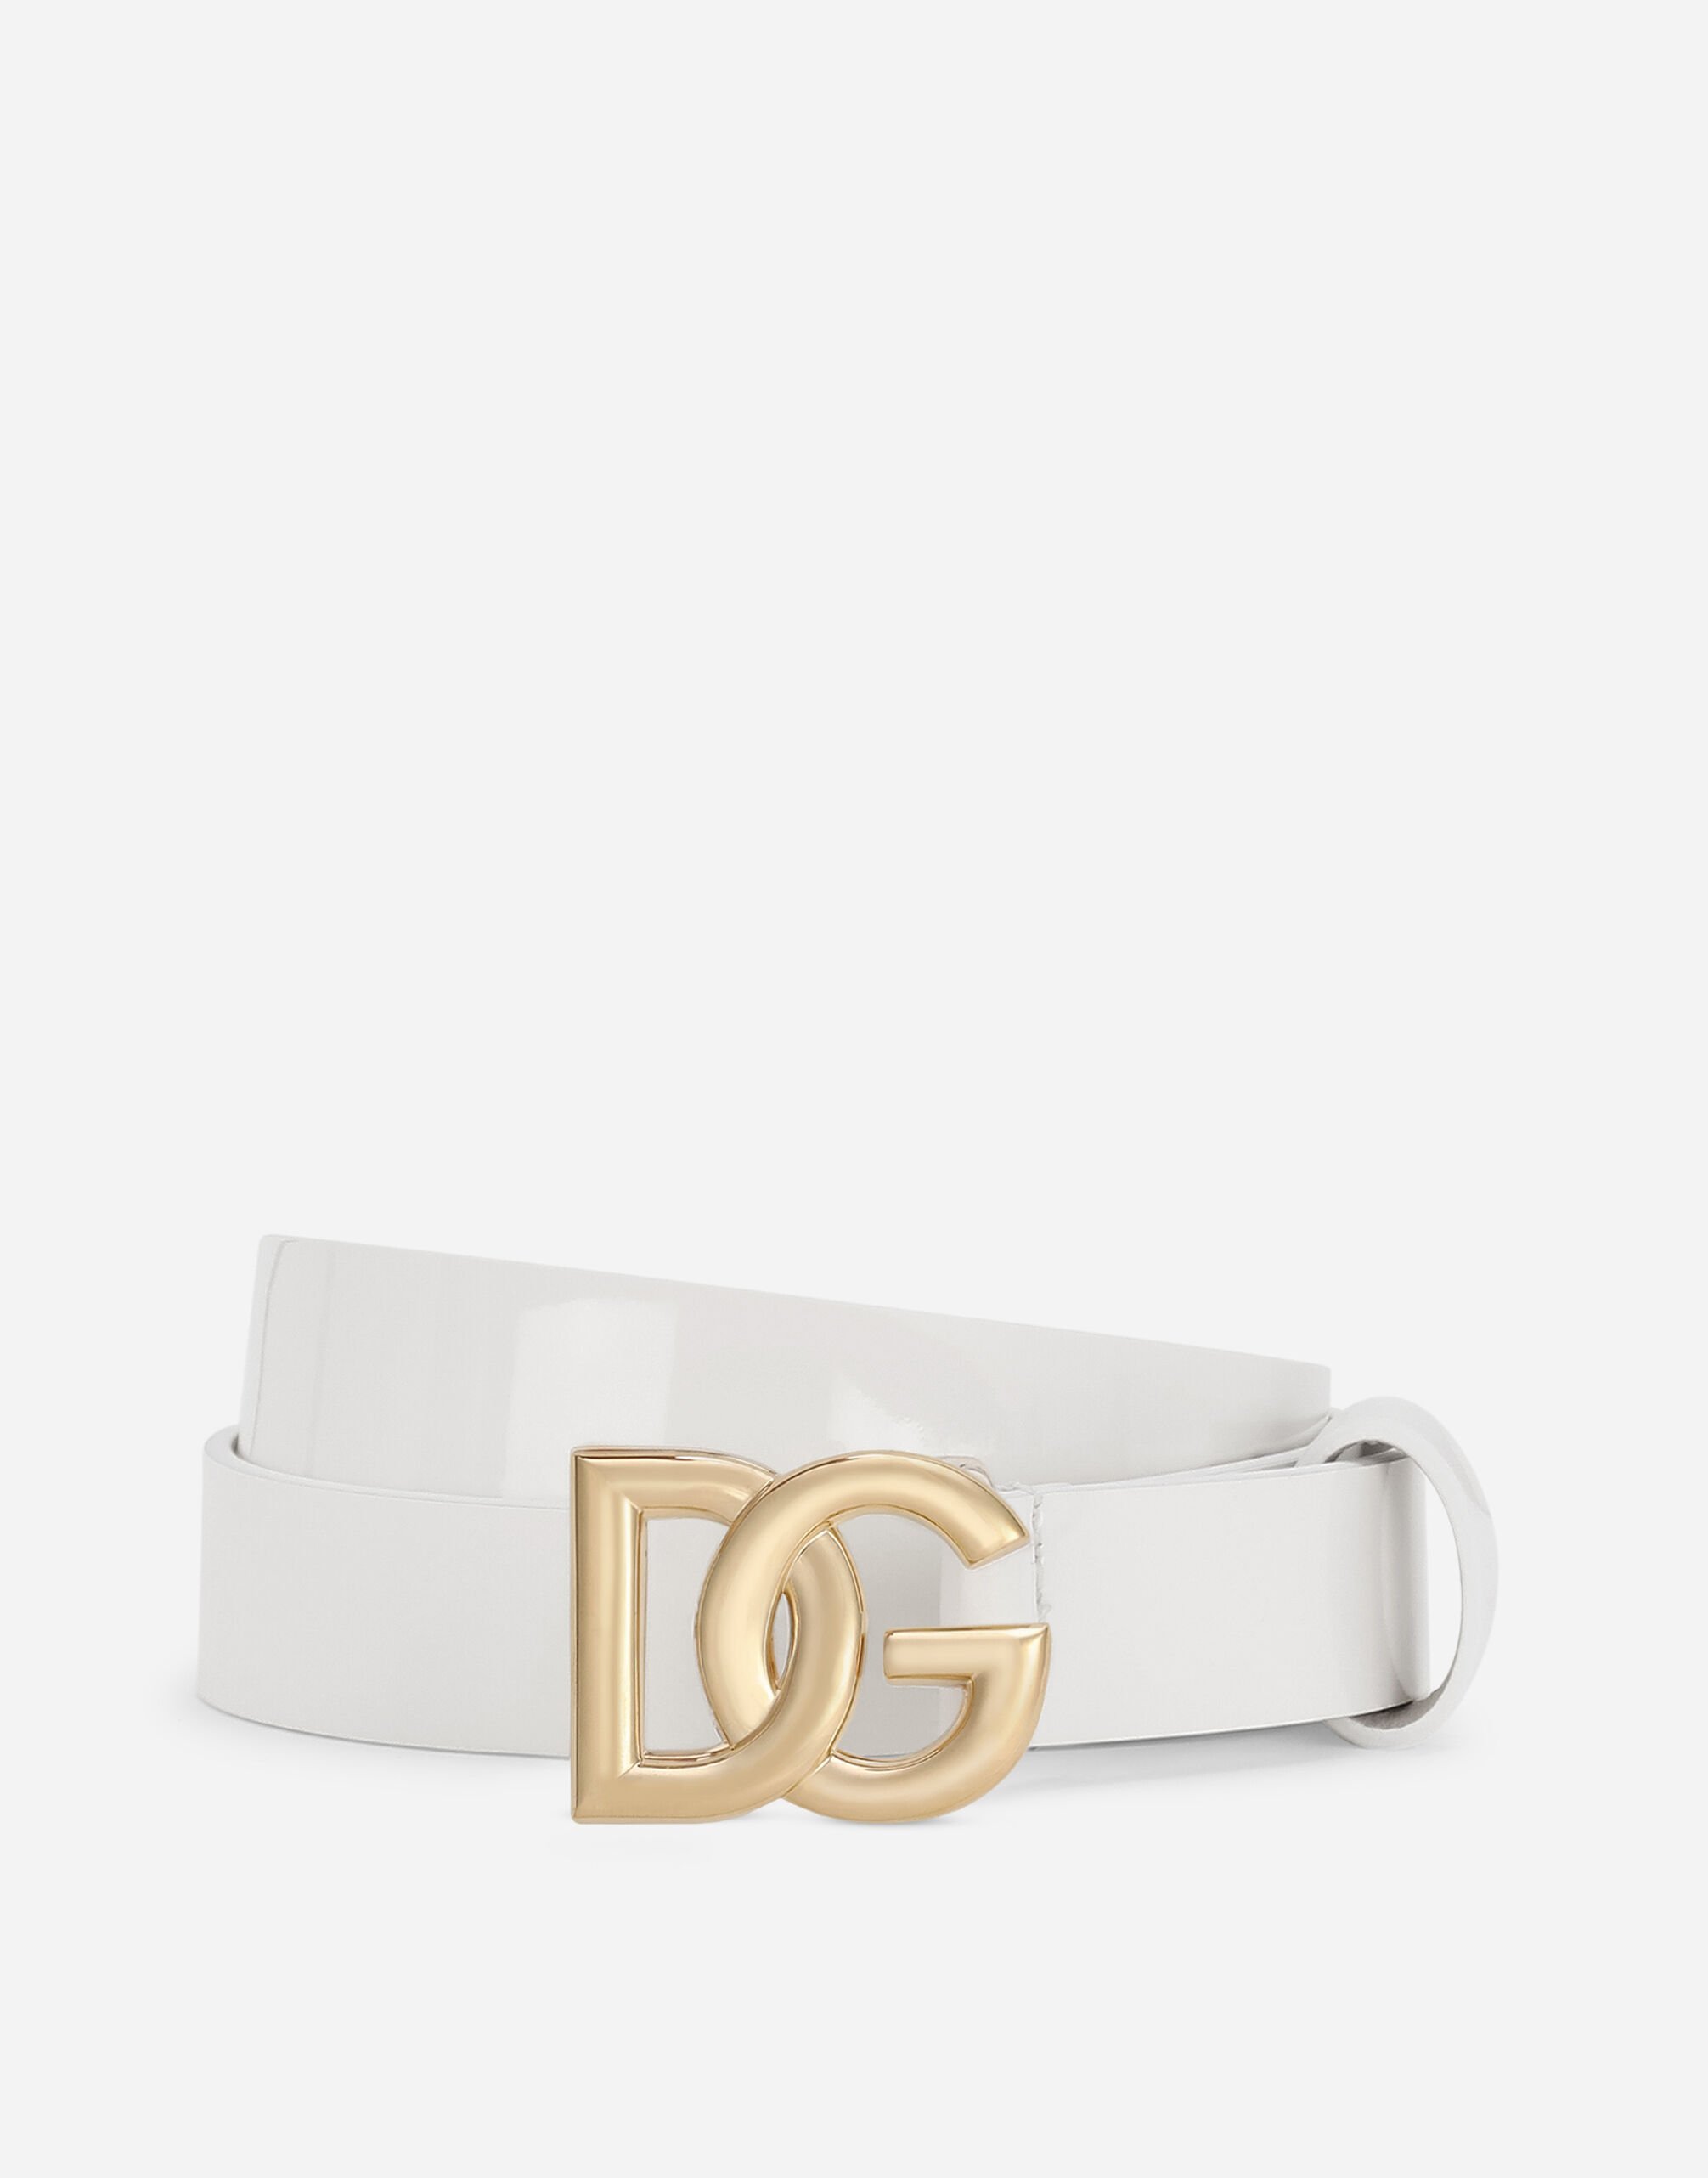 Dolce & Gabbana Patent leather belt with DG logo White EB0003A1067